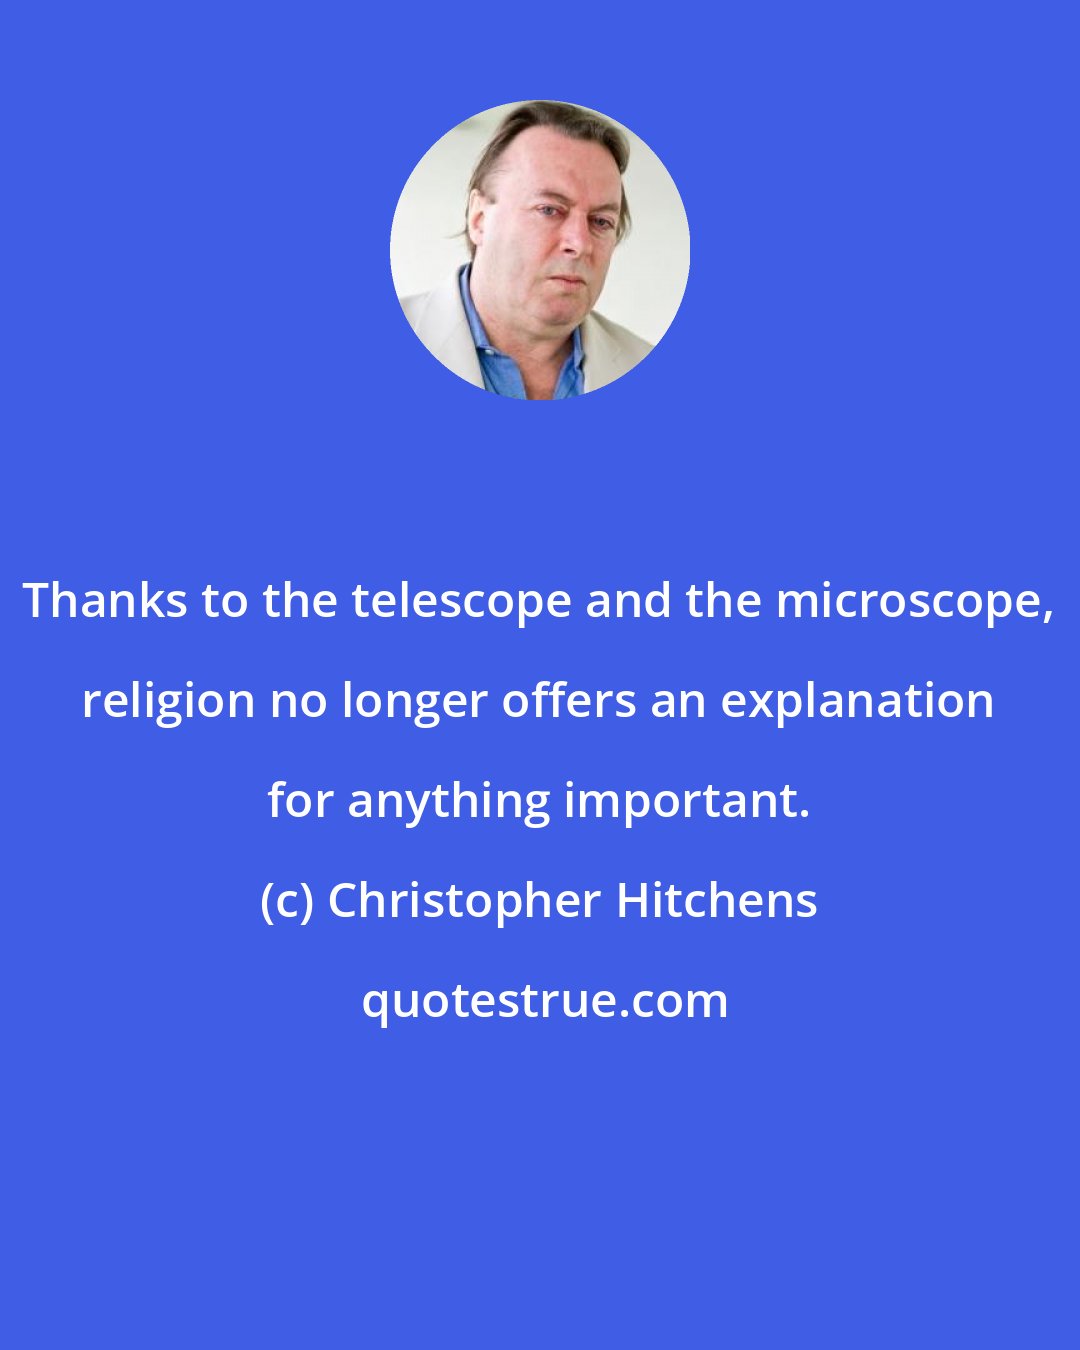 Christopher Hitchens: Thanks to the telescope and the microscope, religion no longer offers an explanation for anything important.